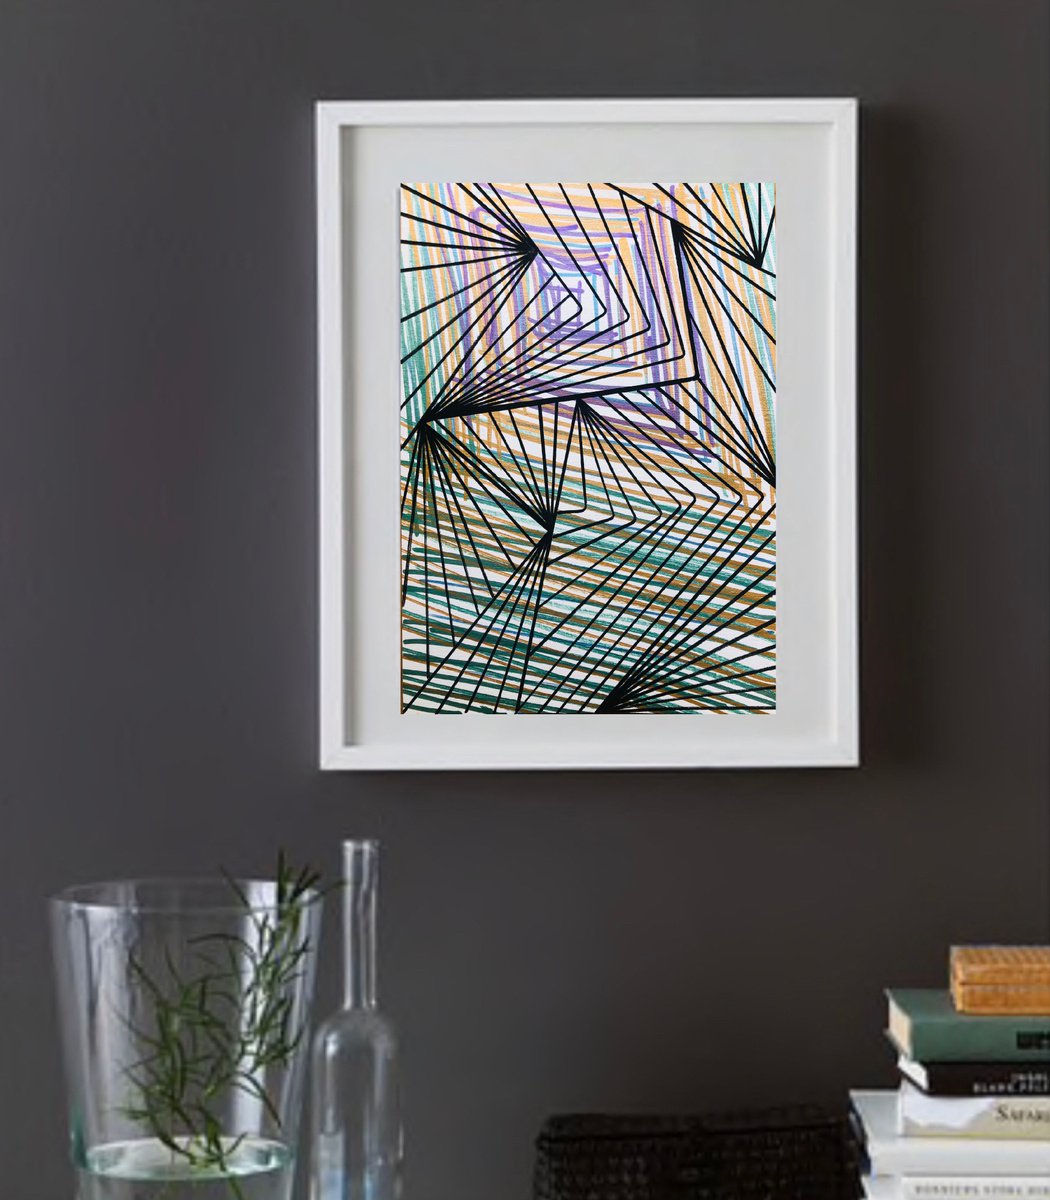 D�but 47 - Abstract Optical Art - Black and Metallic by Elena Renaudiere